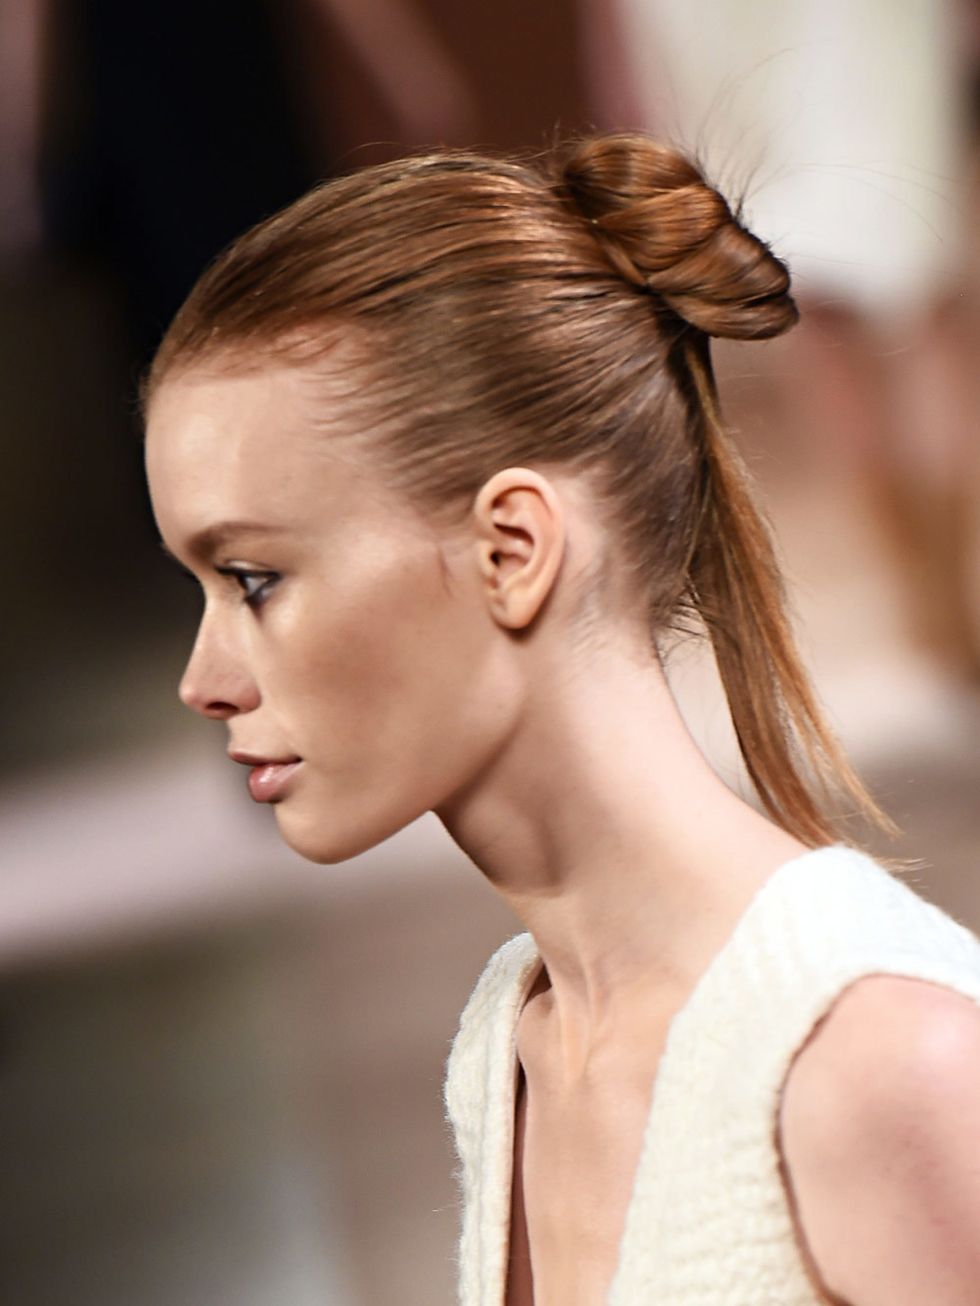 <p><strong><a href="http://www.elleuk.com/catwalk/victoria-beckham/autumn-winter-2015">Victoria Beckham</a></strong></p>

<p>The look: Sophisticated looped pony</p>

<p>Hair stylist: <a href="http://www.elleuk.com/beauty/the-beauty-experts-you-need-to-kno